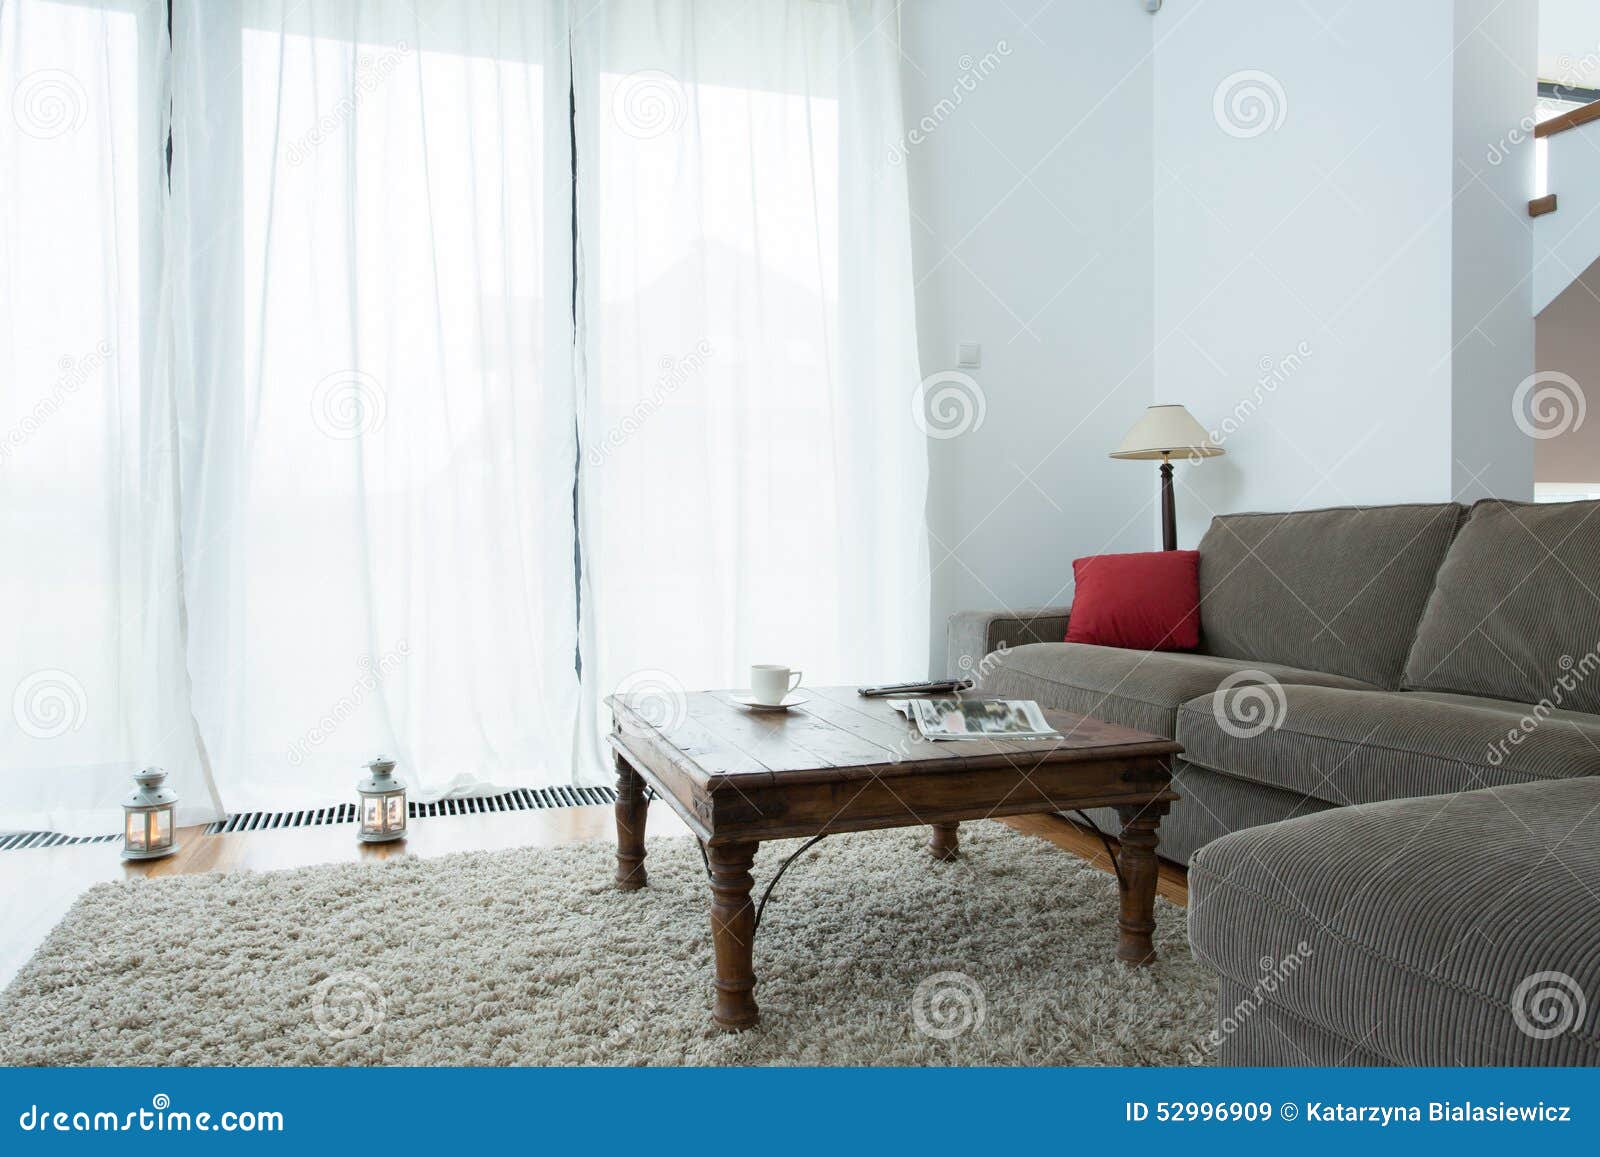 Grey Couch And Coffee Table Stock Image - Image of furniture, floor: 52996909